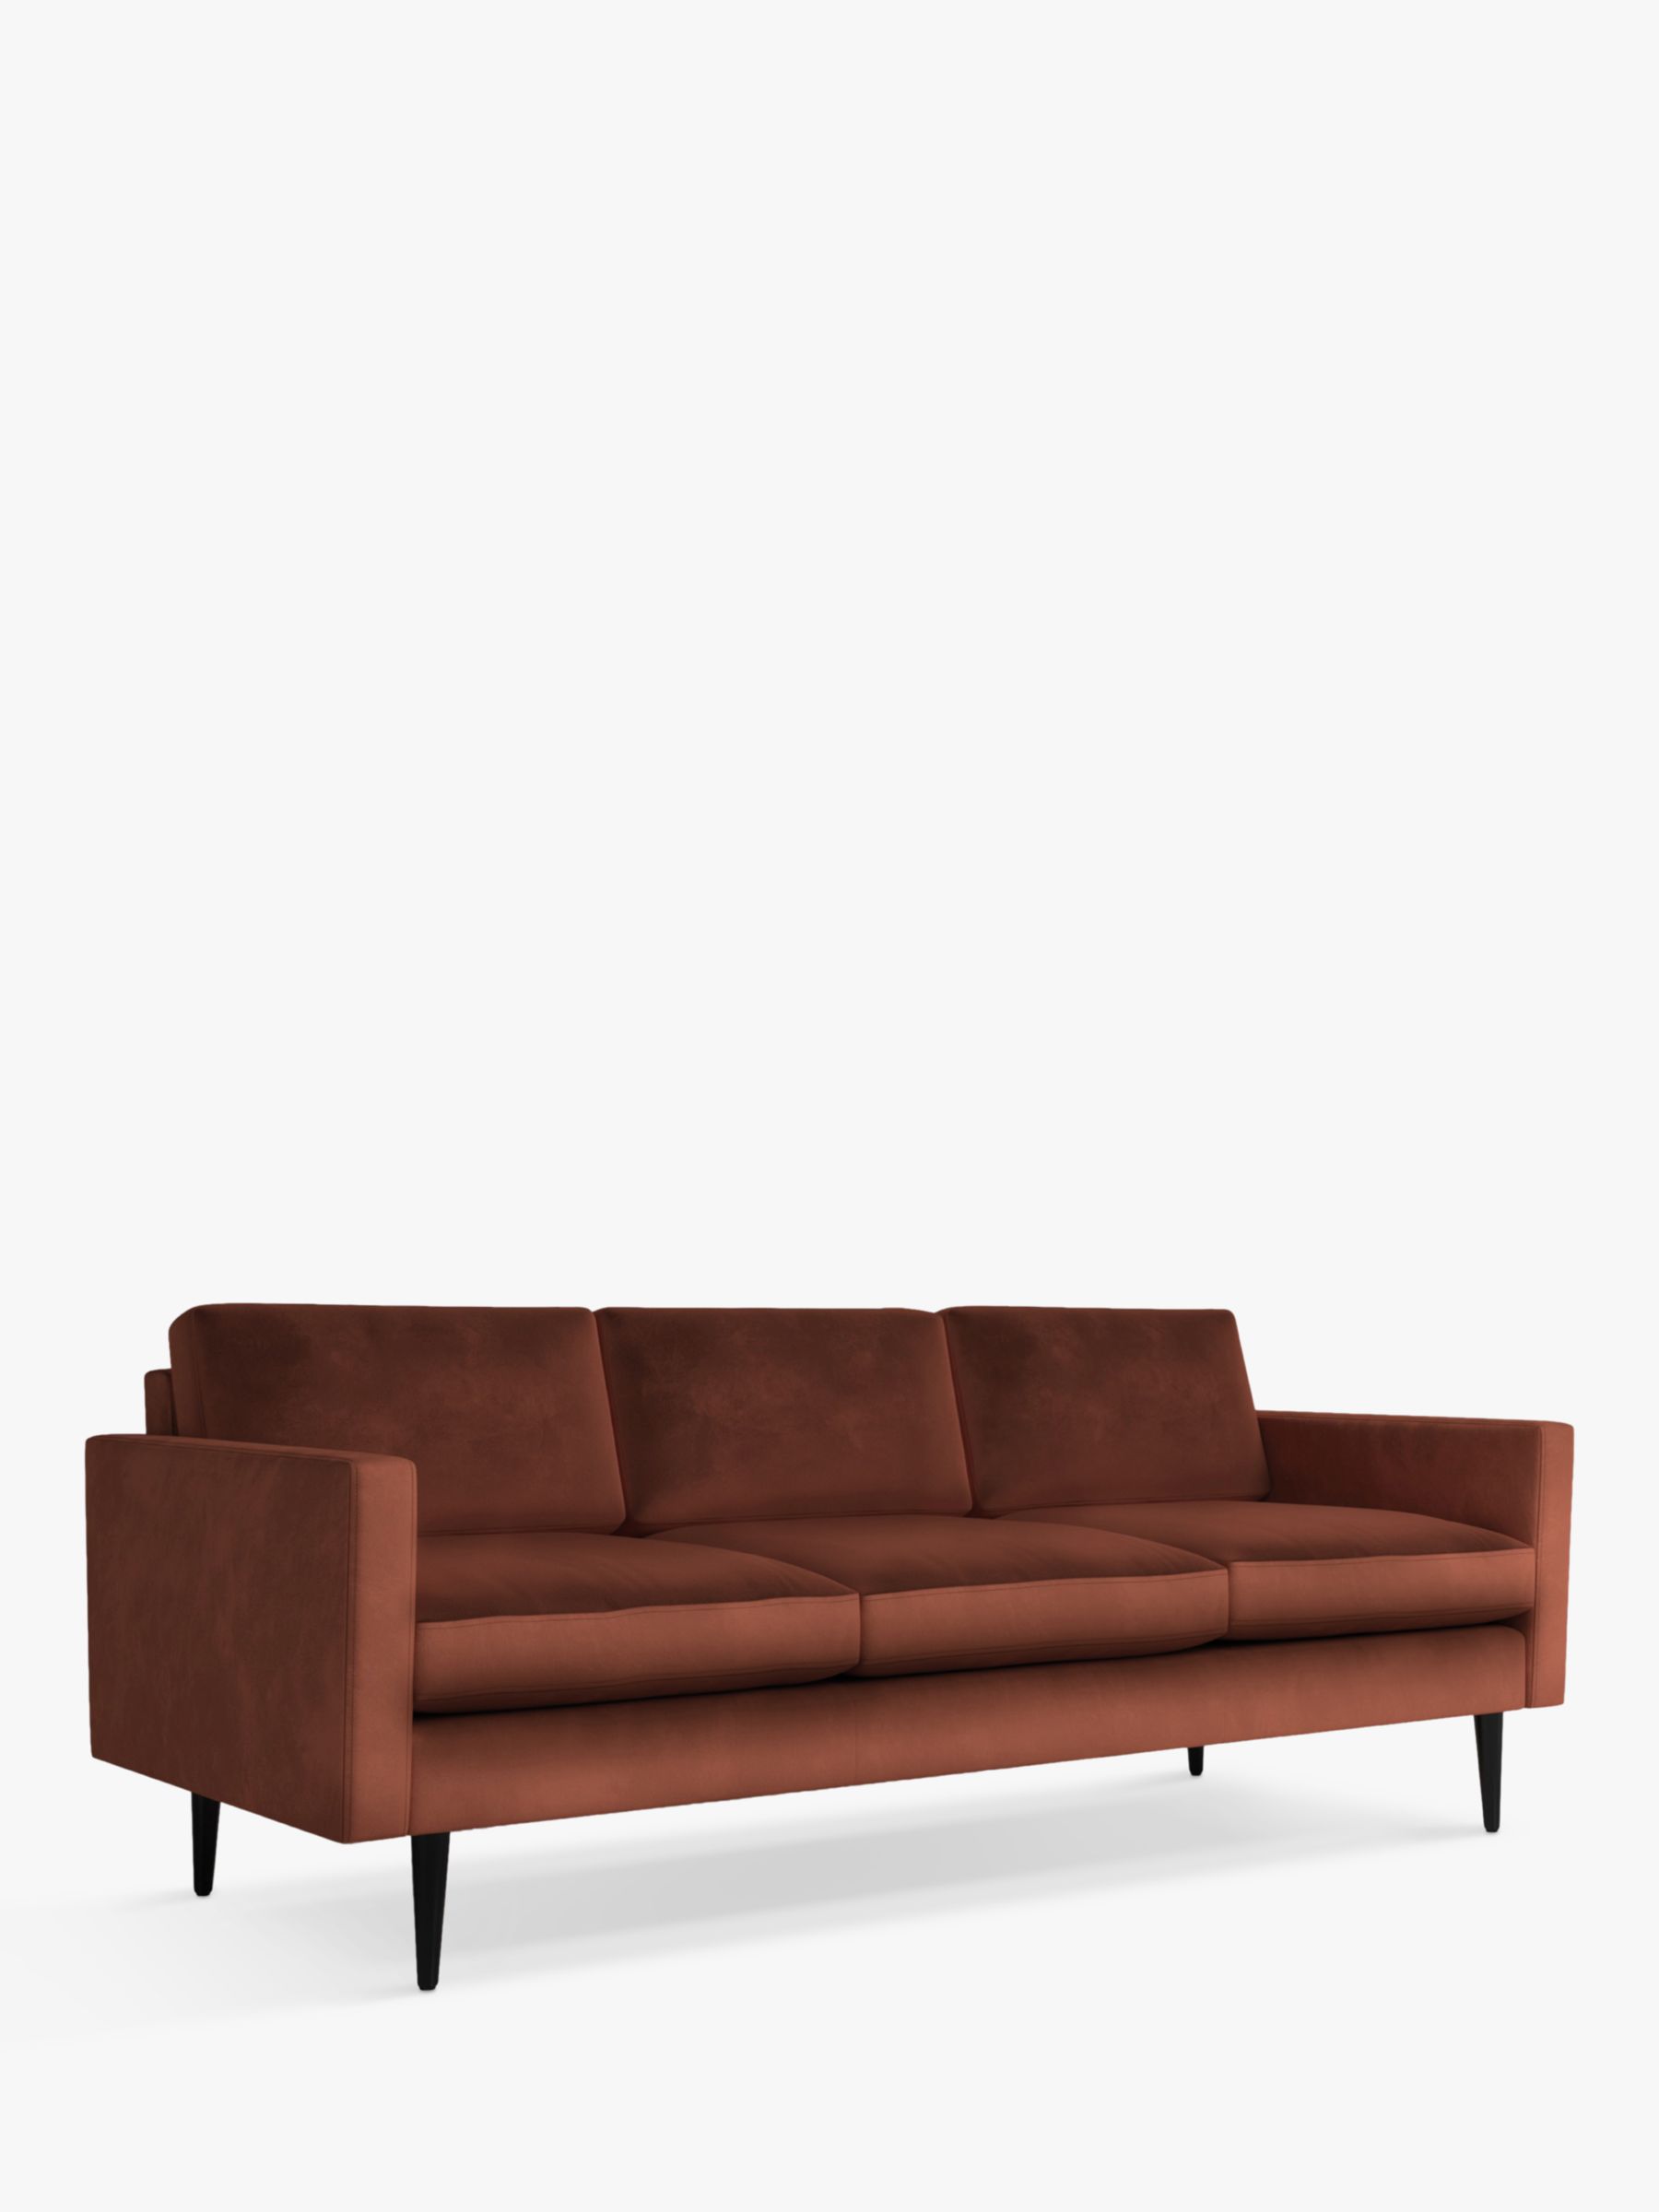 Photo of Swyft model 01 large 3 seater sofa